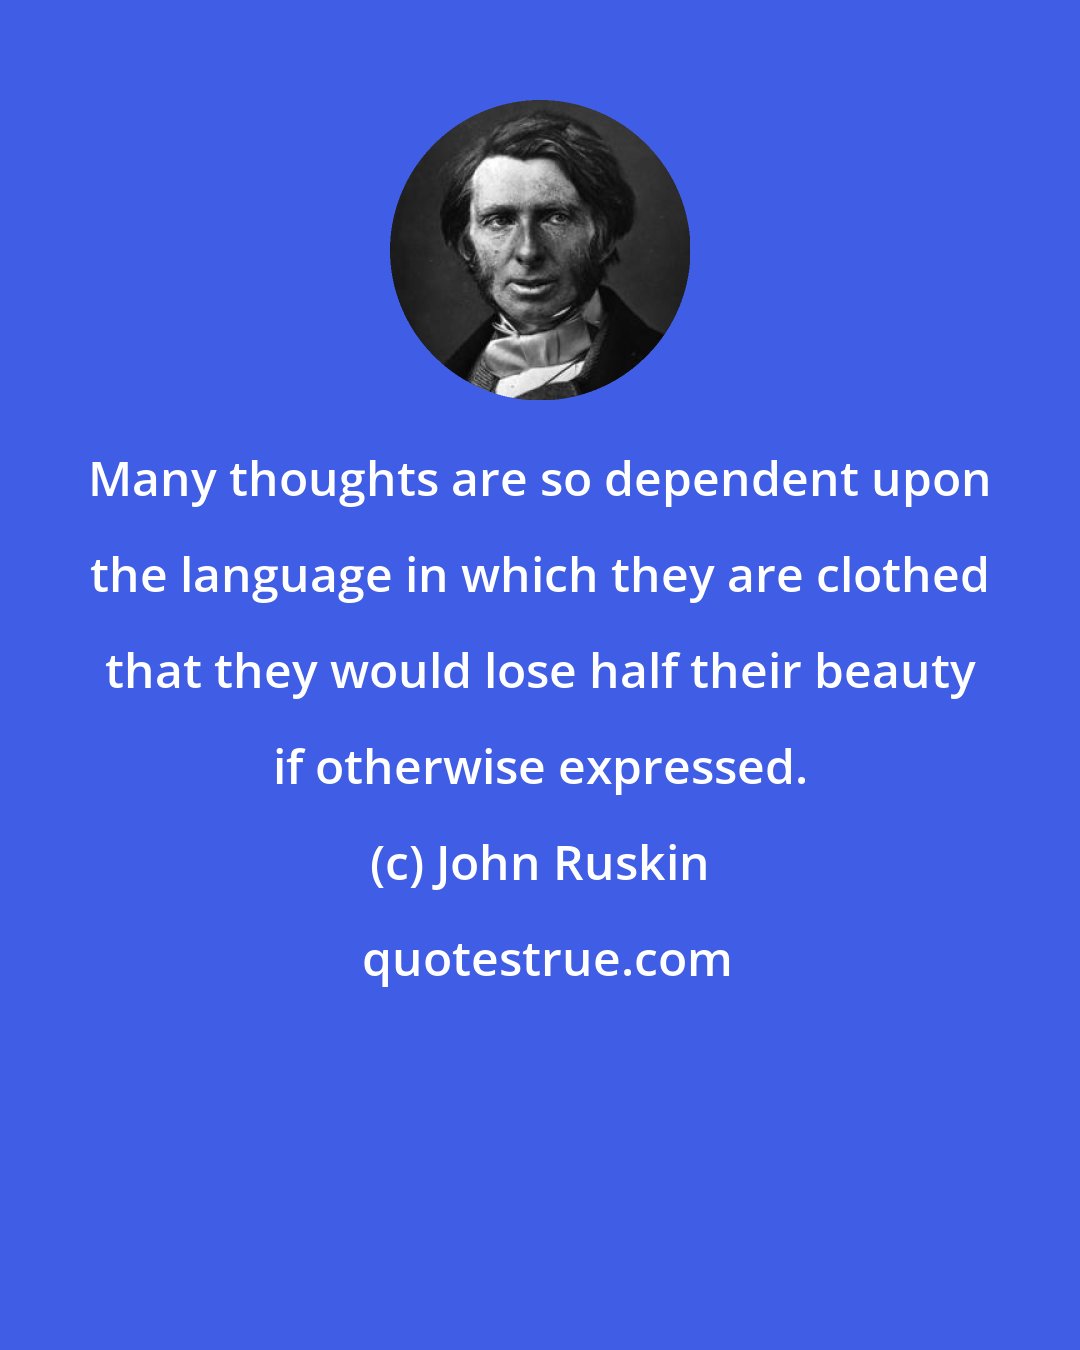 John Ruskin: Many thoughts are so dependent upon the language in which they are clothed that they would lose half their beauty if otherwise expressed.